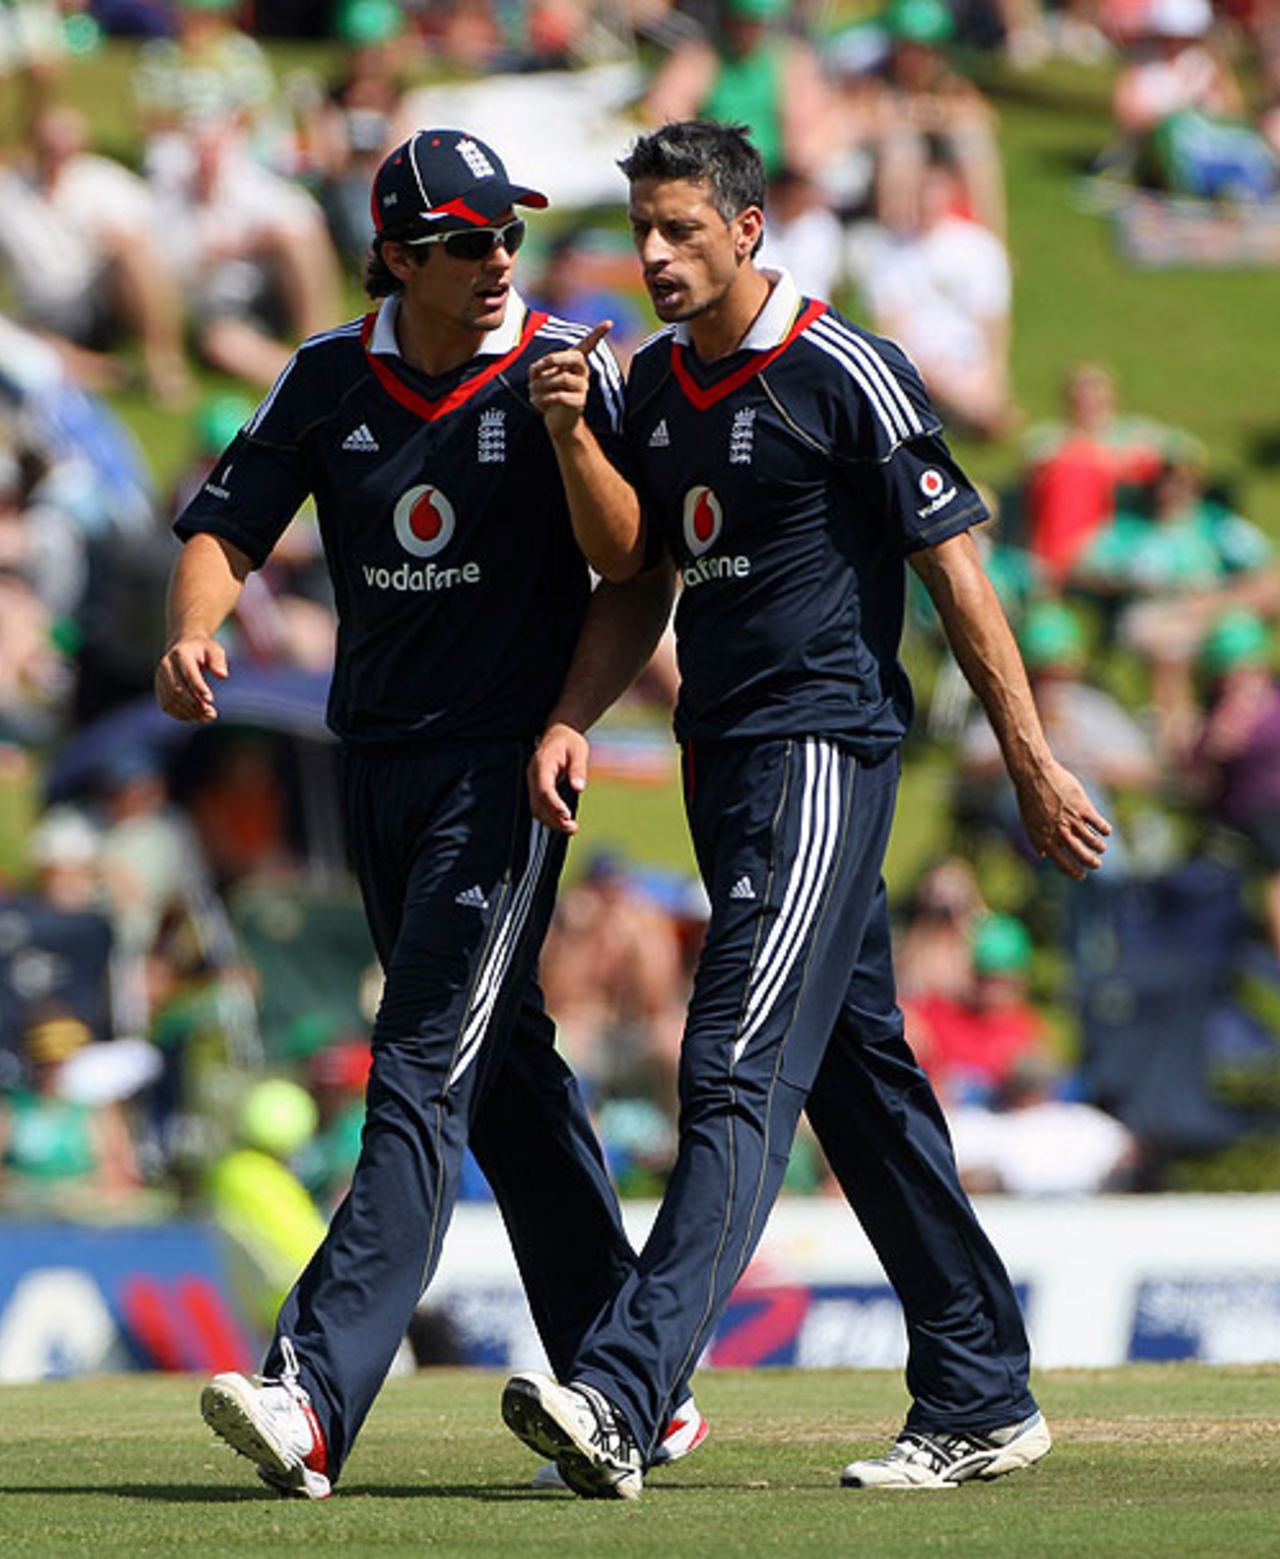 Alastair Cook, England's stand-in captain, offers some advice to Sajid Mahmood, Centurion, November 15, 2009